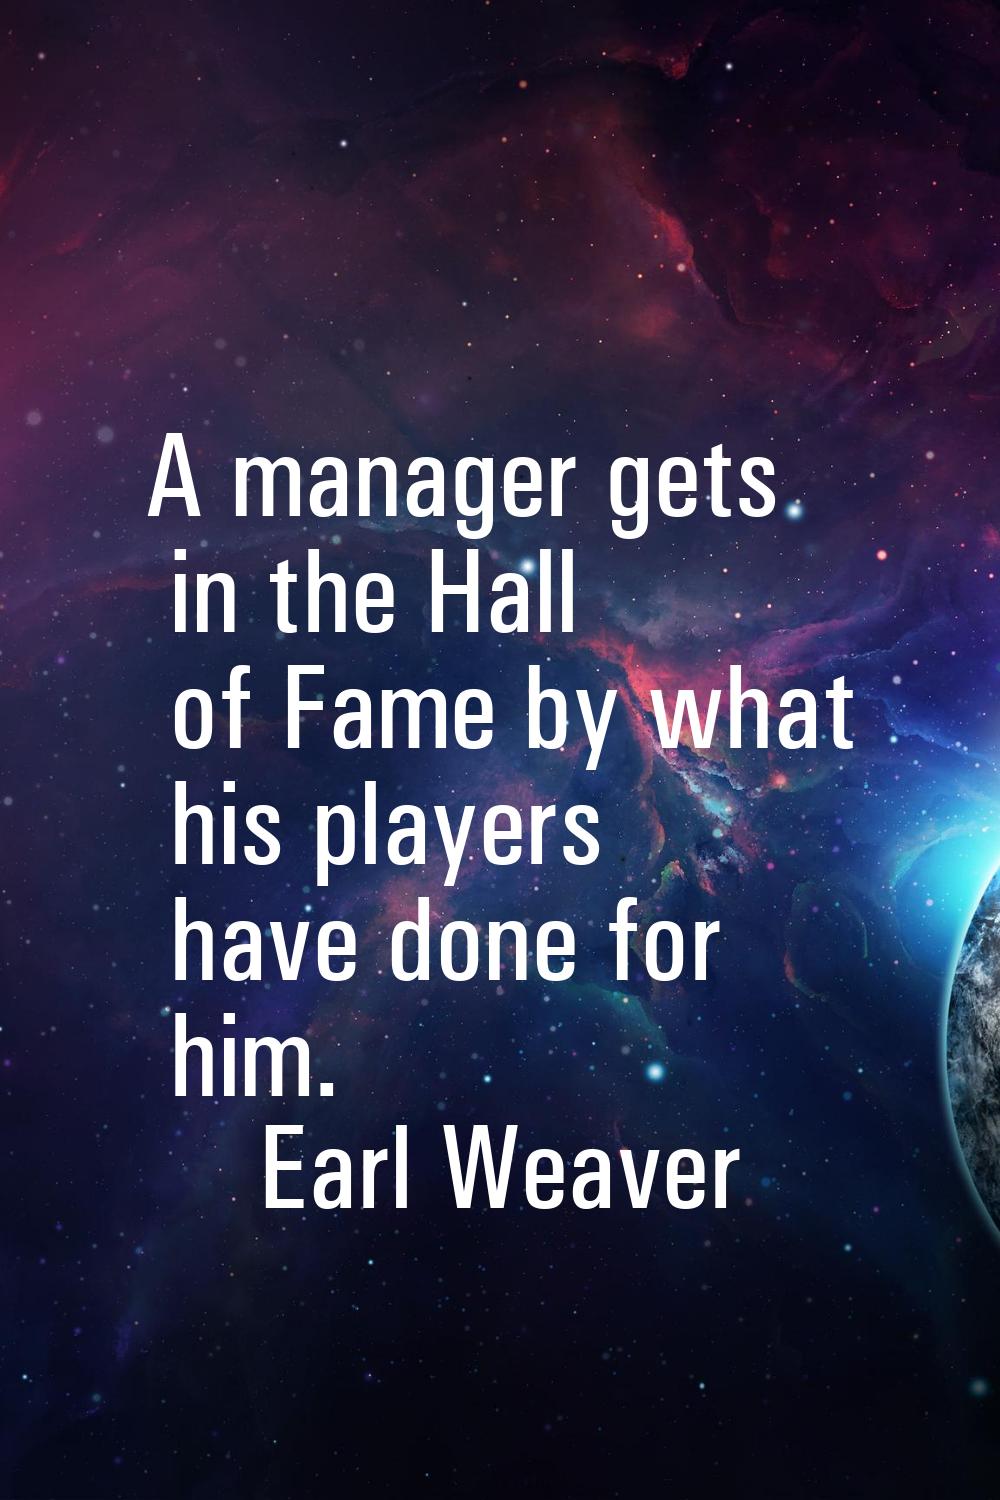 A manager gets in the Hall of Fame by what his players have done for him.